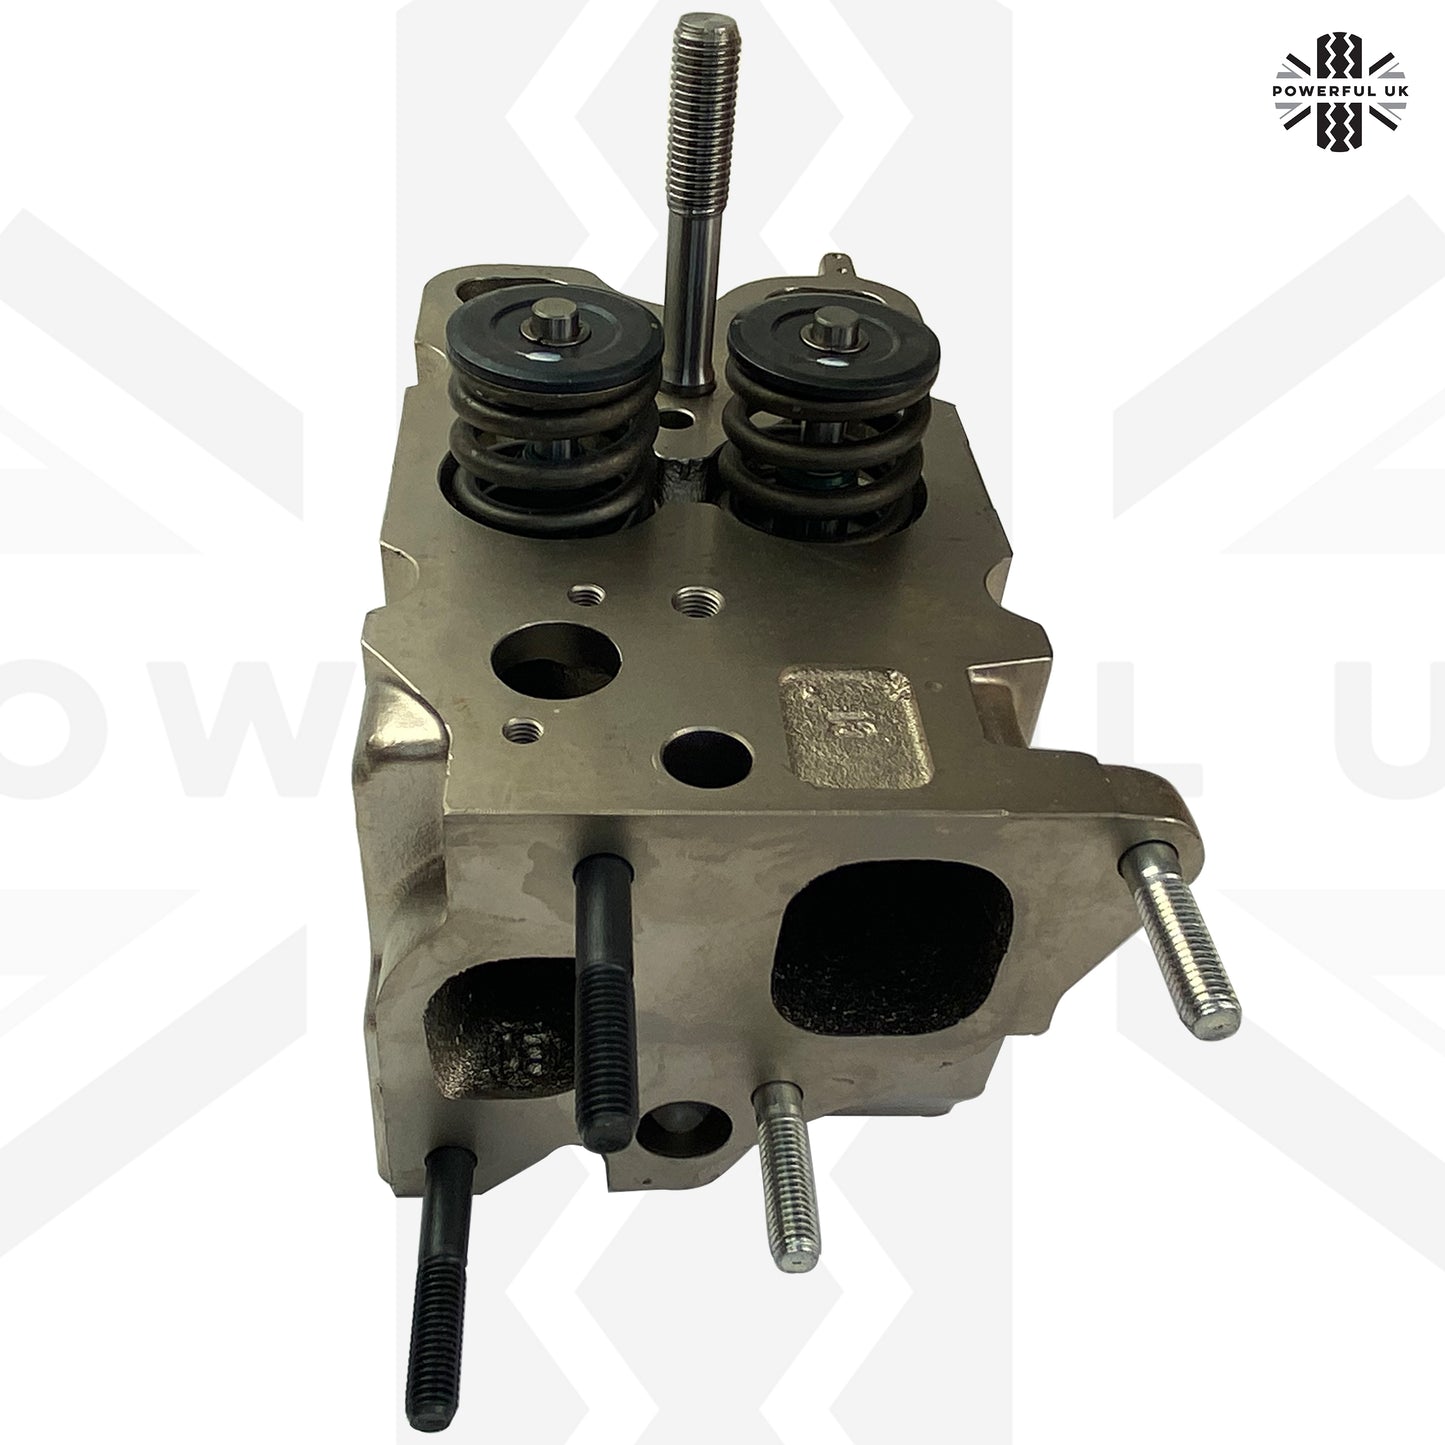 Complete Cylinder Head for Range Rover Classic 2.5 VM Diesel - Single